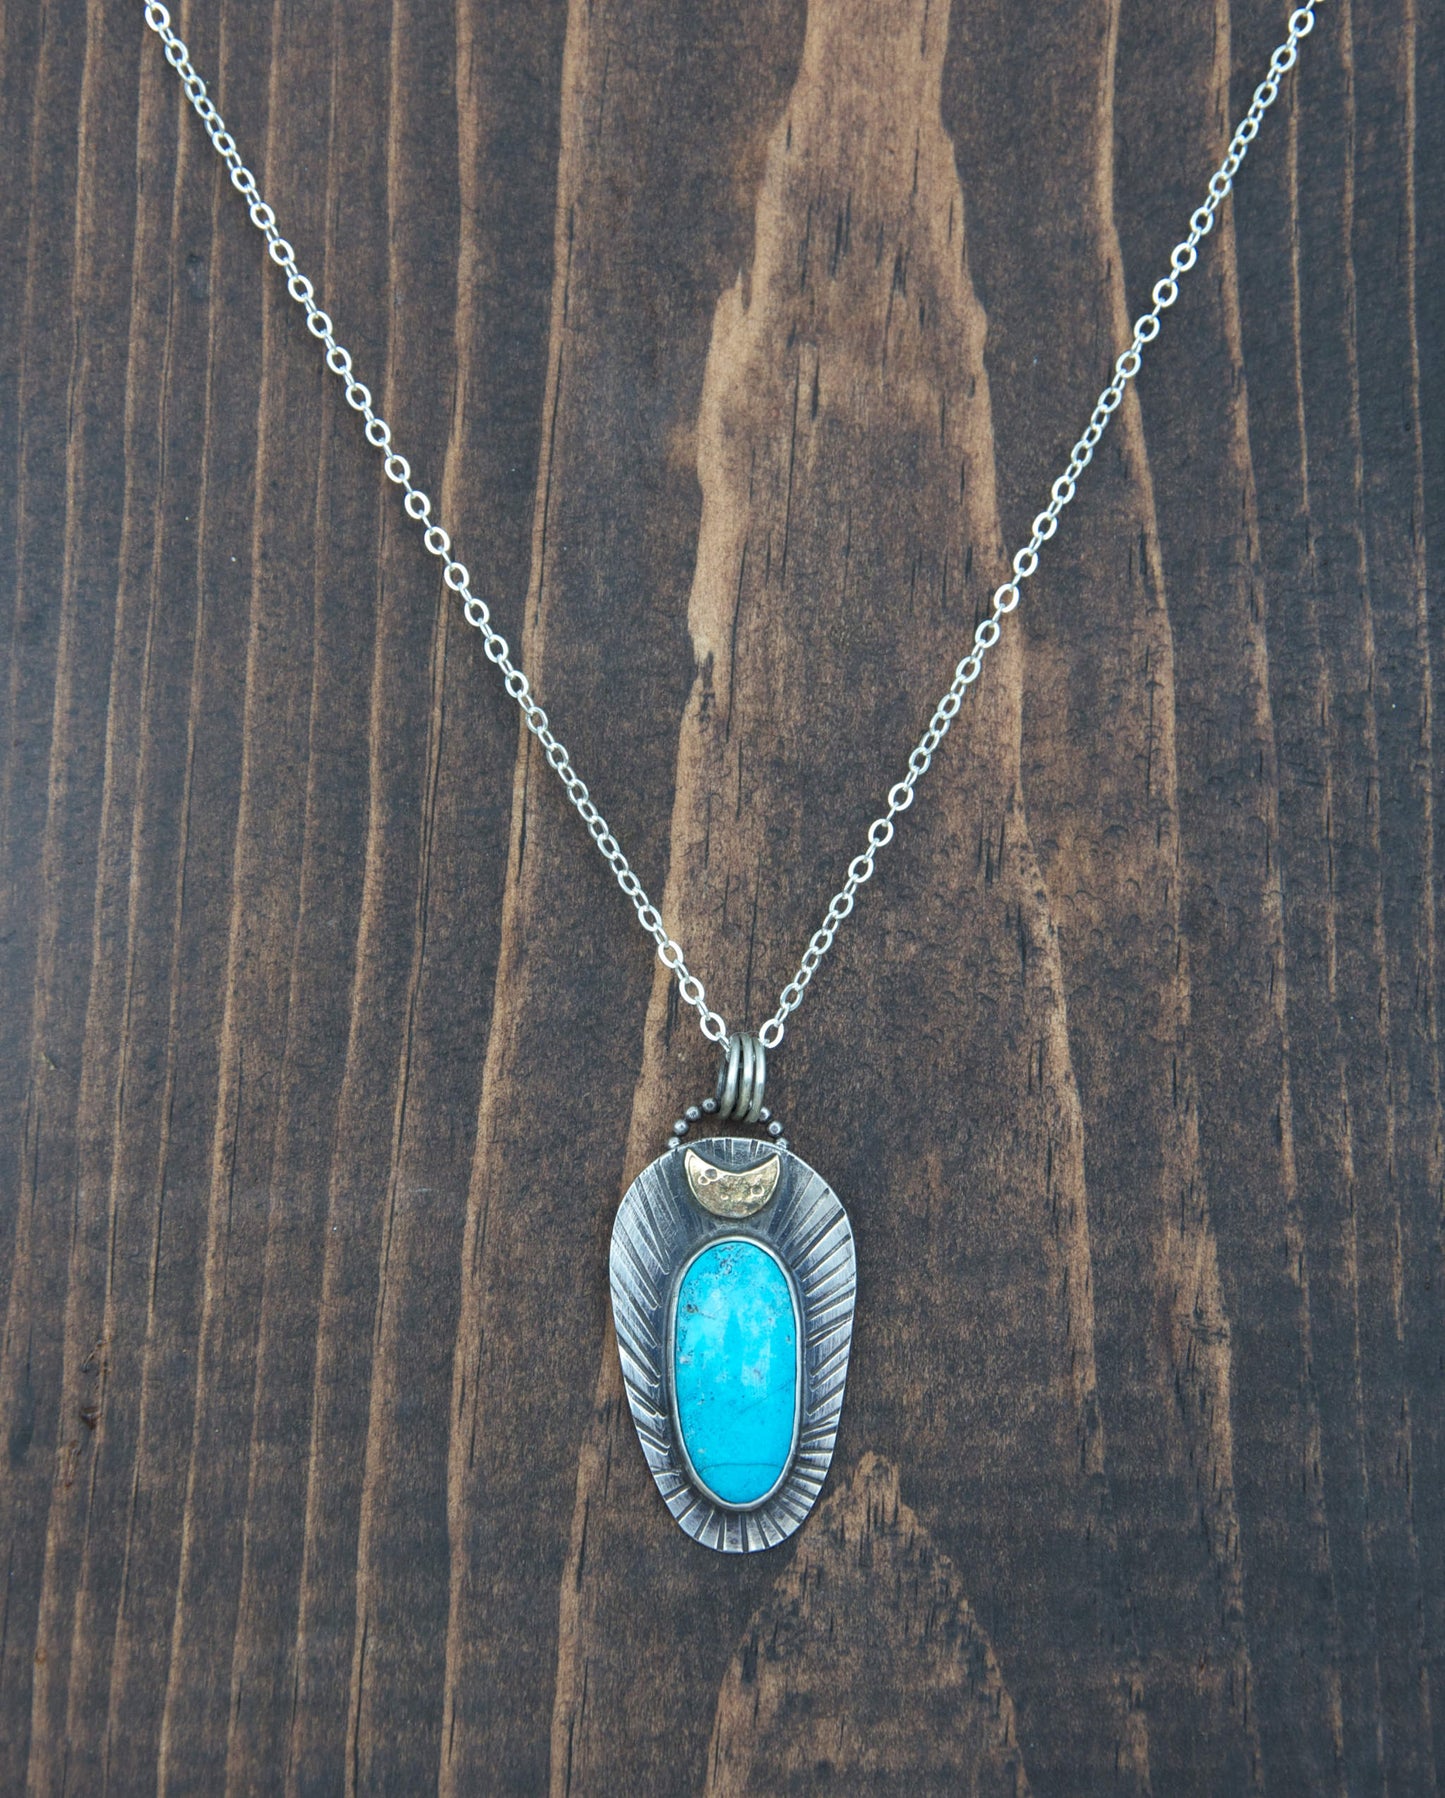 Kingman Turquoise Pendant - Crescent Moon Jewelry - Turquoise and Sterling Silver Pendant - Handcrafted Jewelry by Special J Creations – One of a Kind